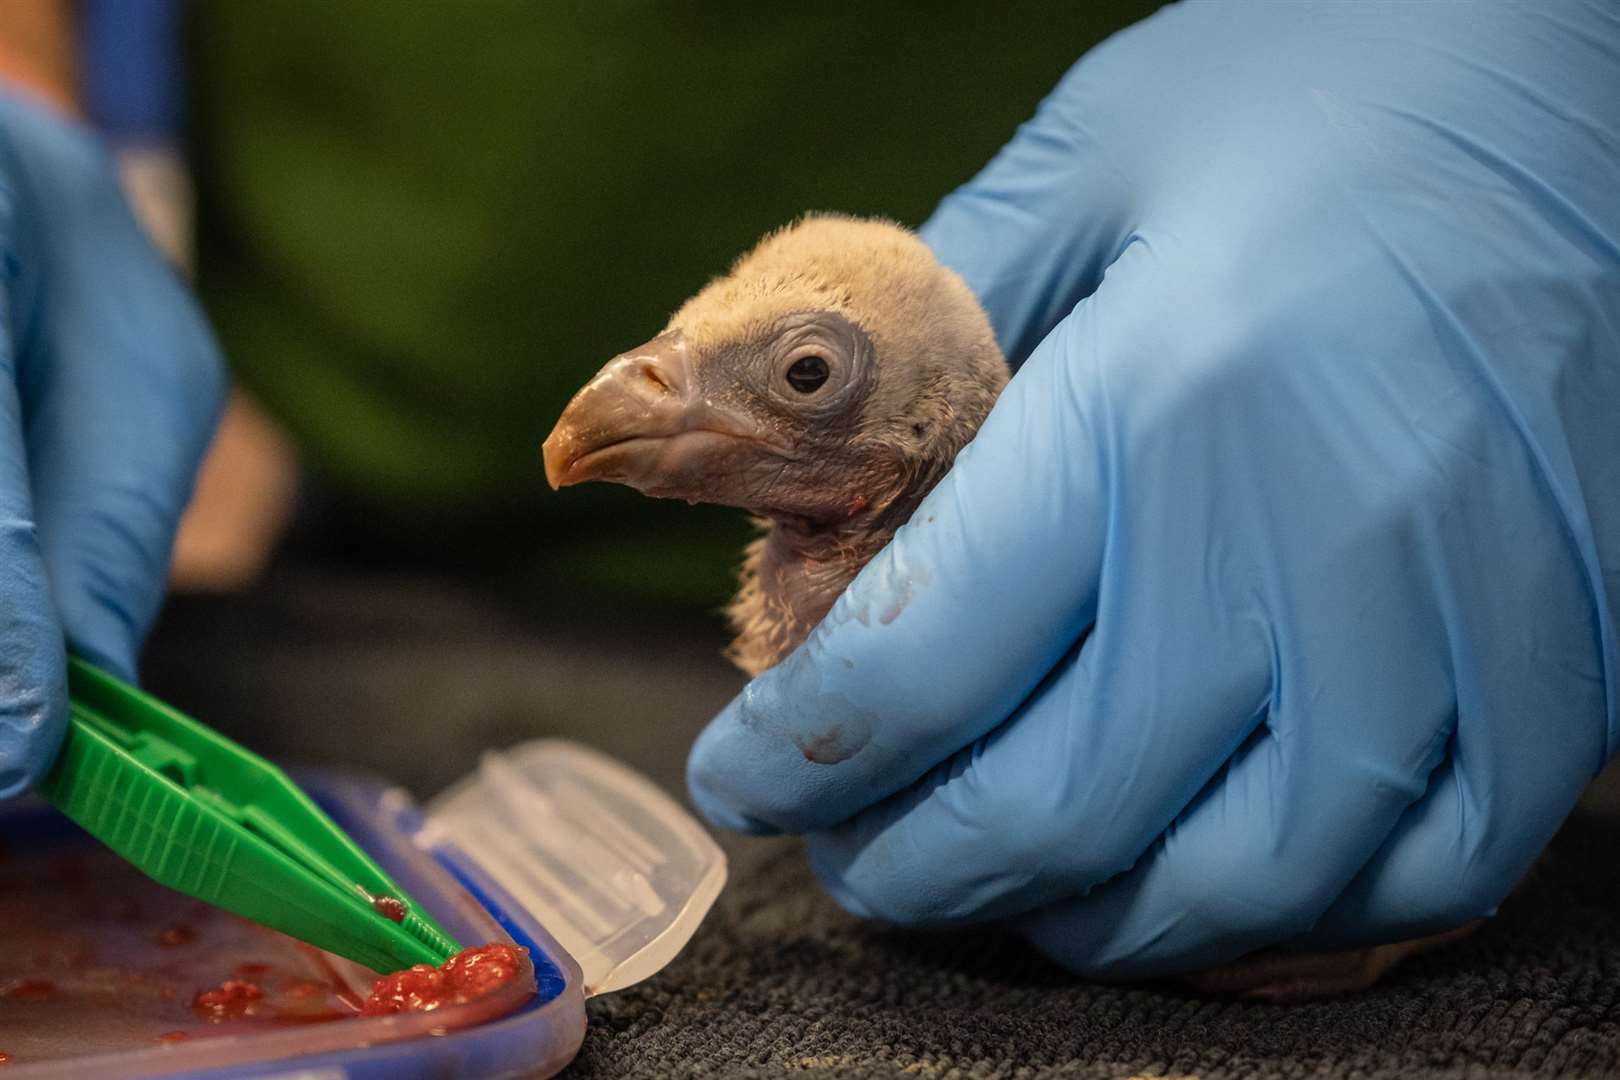 The birth was the first vulture chick hatching in more than 40 years (ZSL London Zoo)